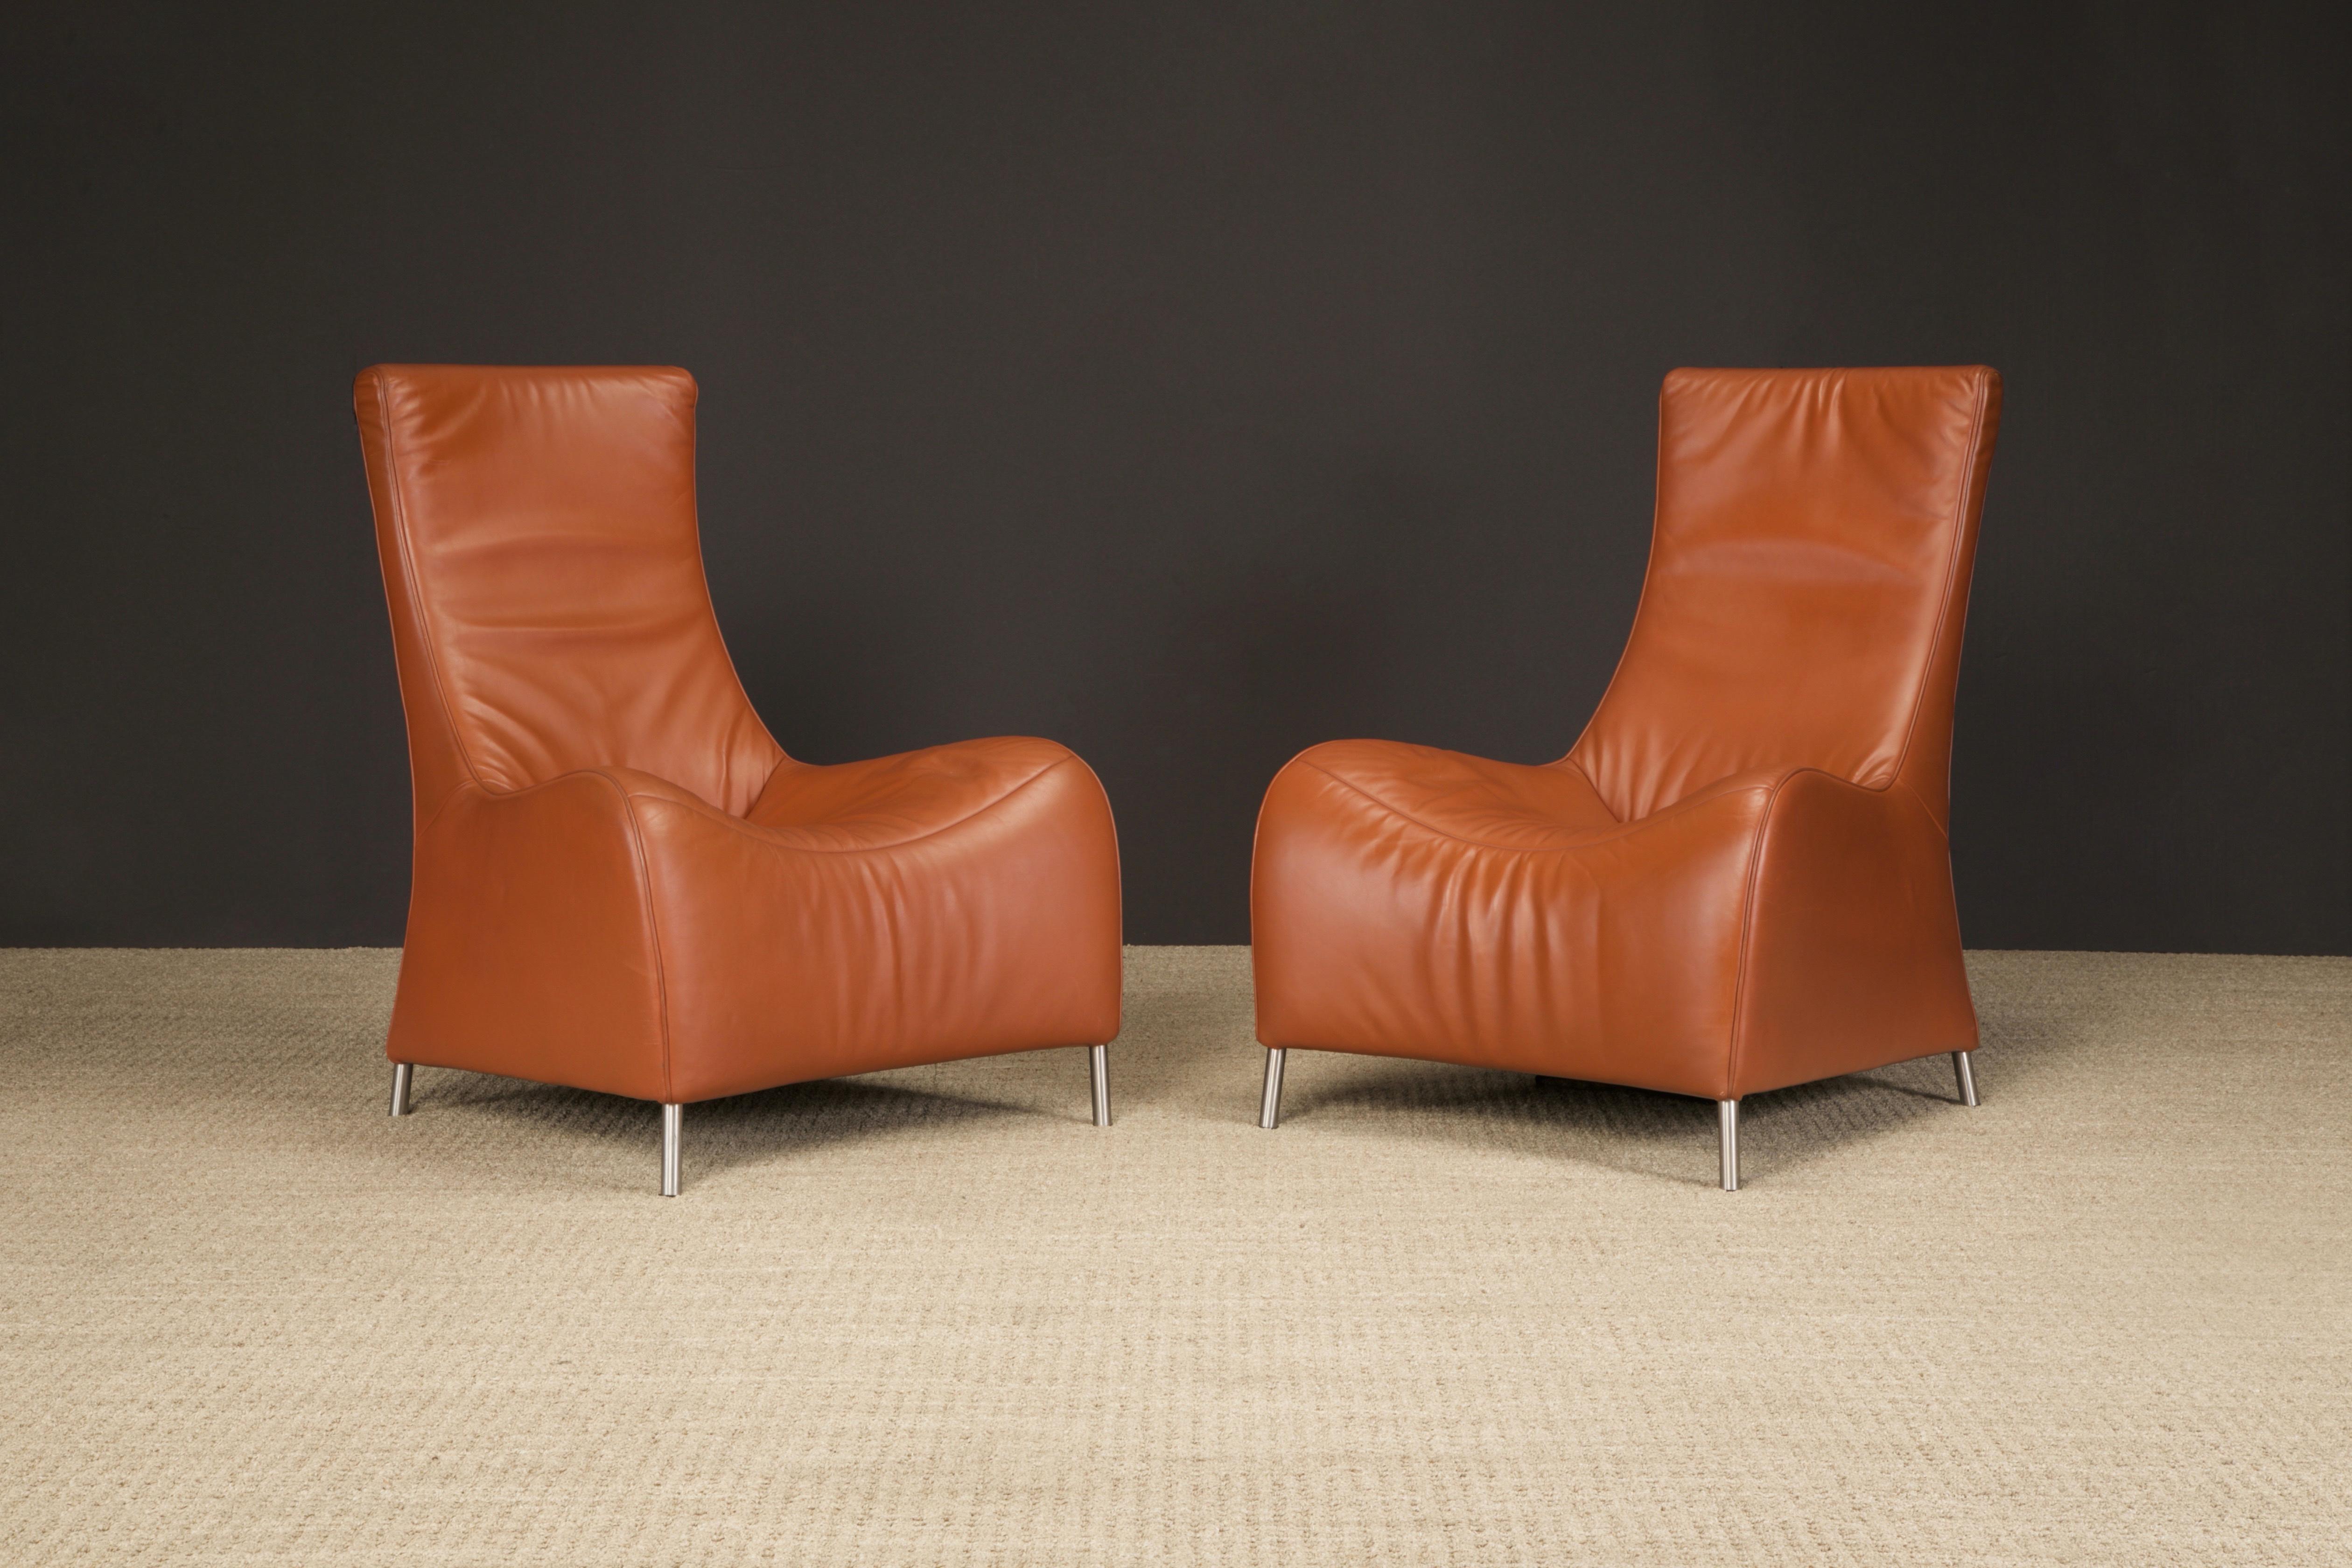 Modern Cognac Leather Lounge Chairs by Mathias Hoffmann for De Sede, 1980s, Signed For Sale